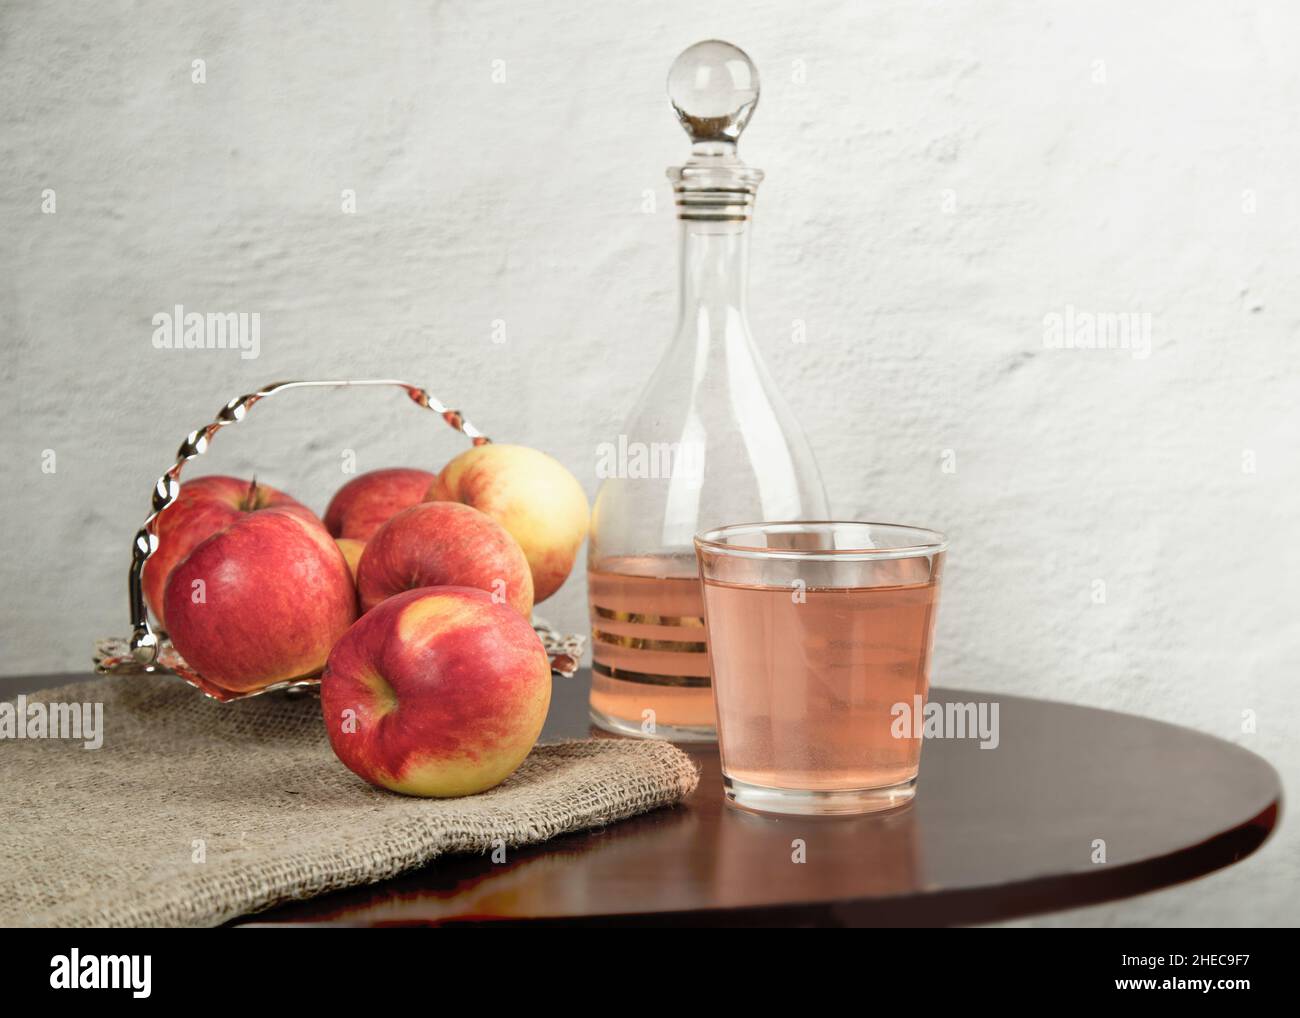 A glass and a decanter with apple cider vinegar on a light table against the background of a concrete wall. The concept of weight control Stock Photo